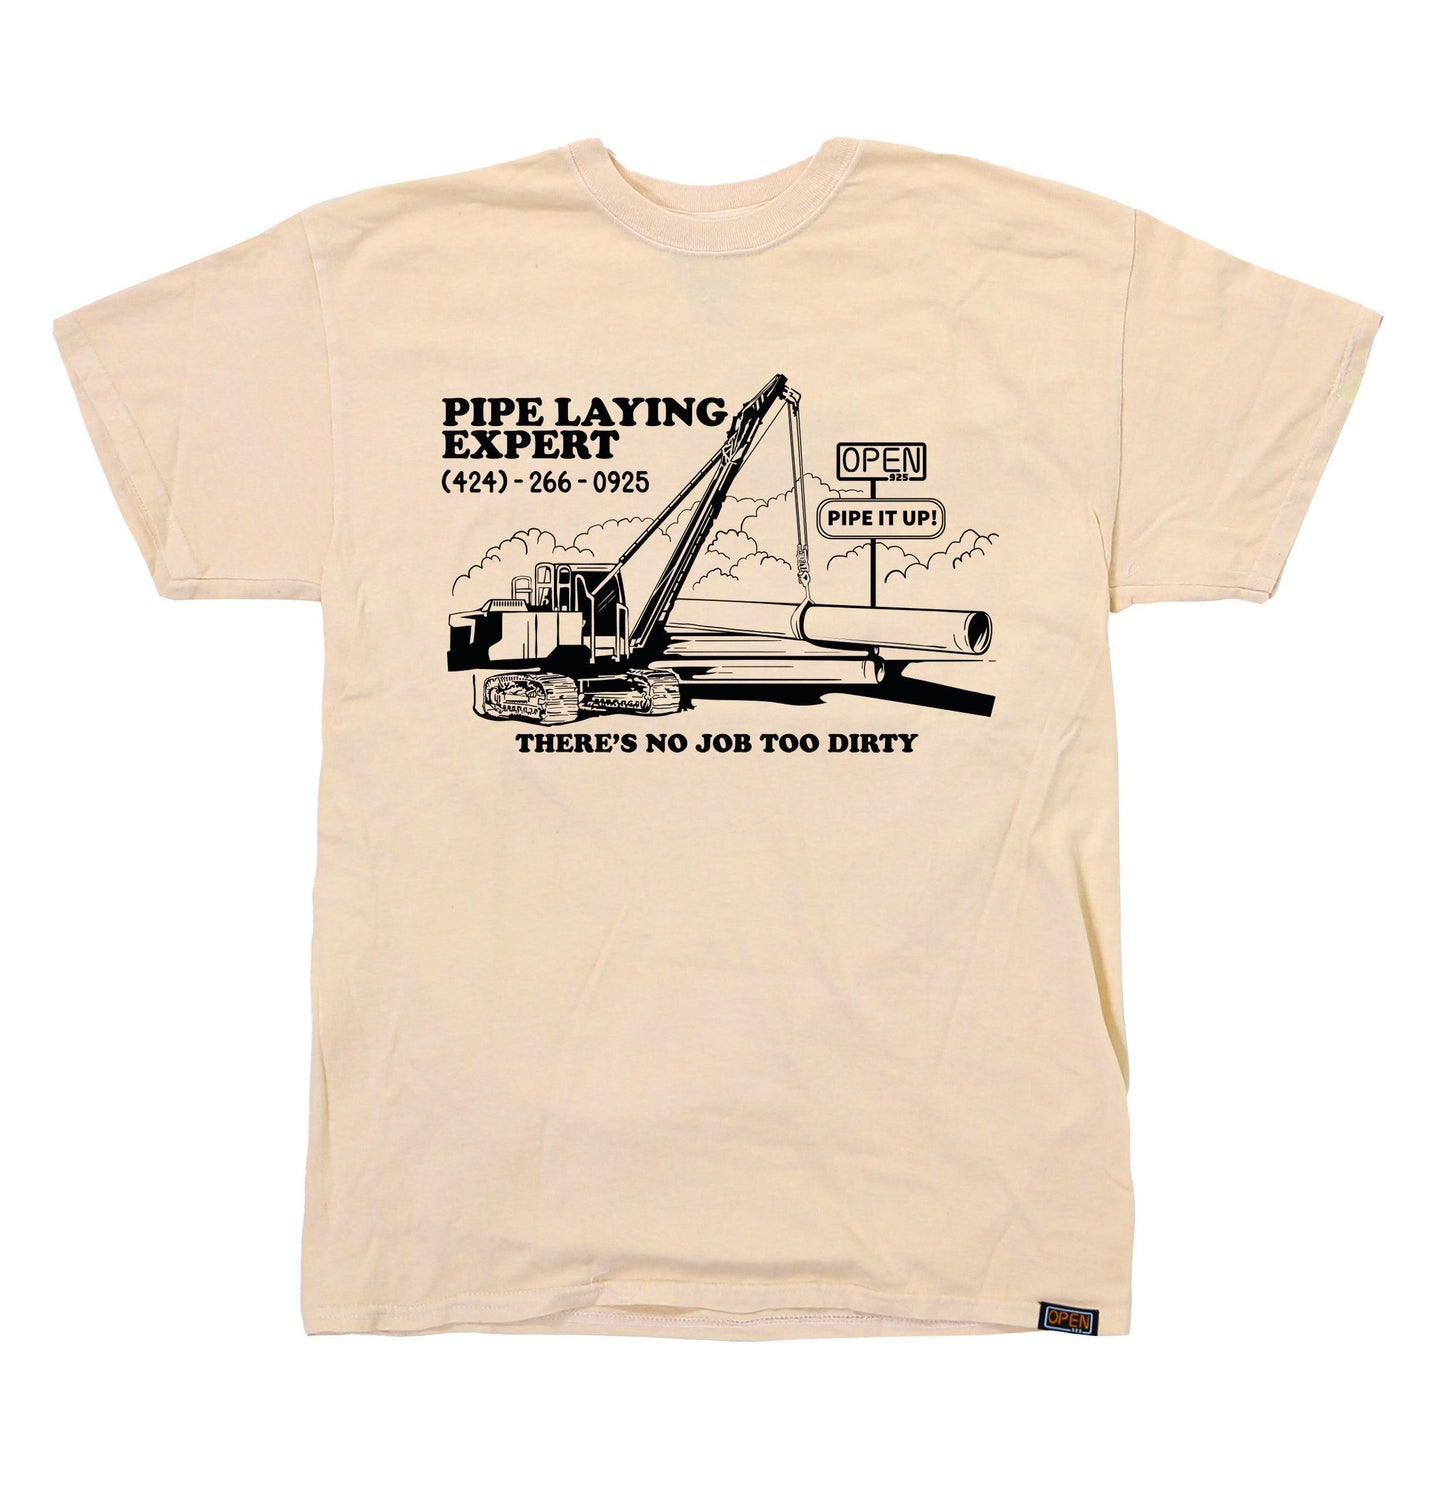 Pipe Laying Experts Tee Washed Tangerine-Open 925